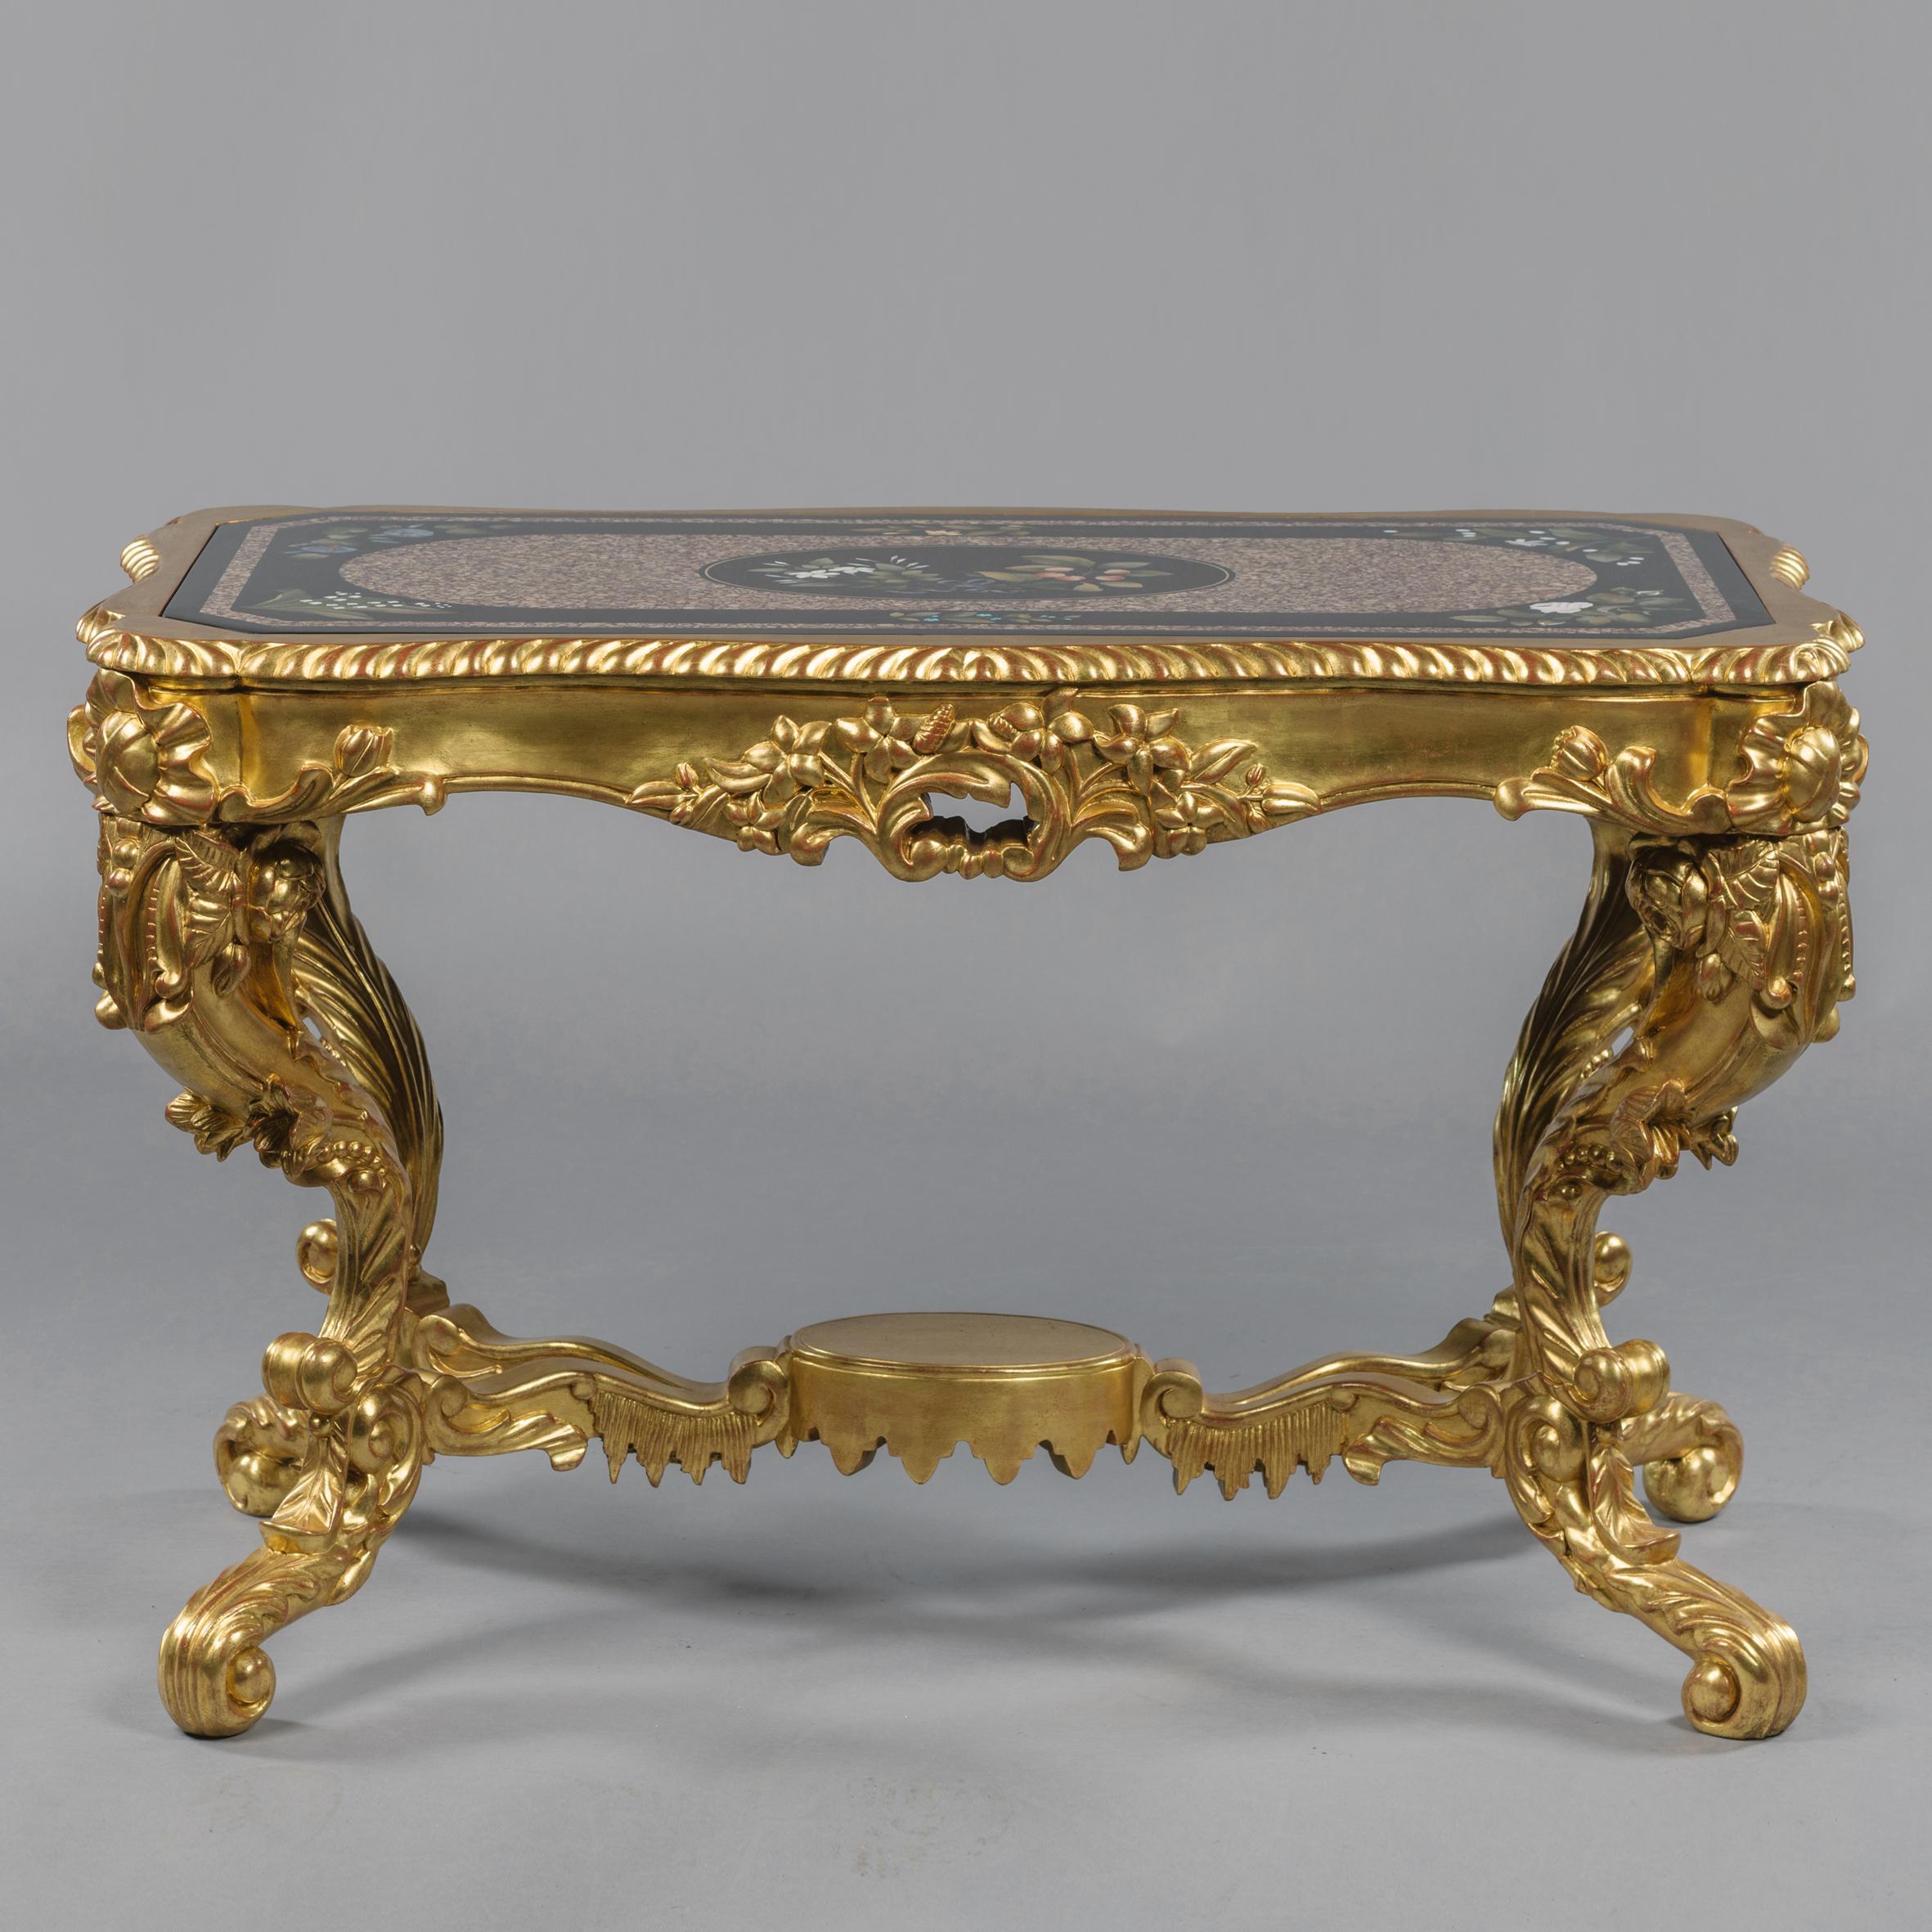 Rococo Giltwood Low Centre Table With A Pietre Dure Inlaid Marble Top For Sale